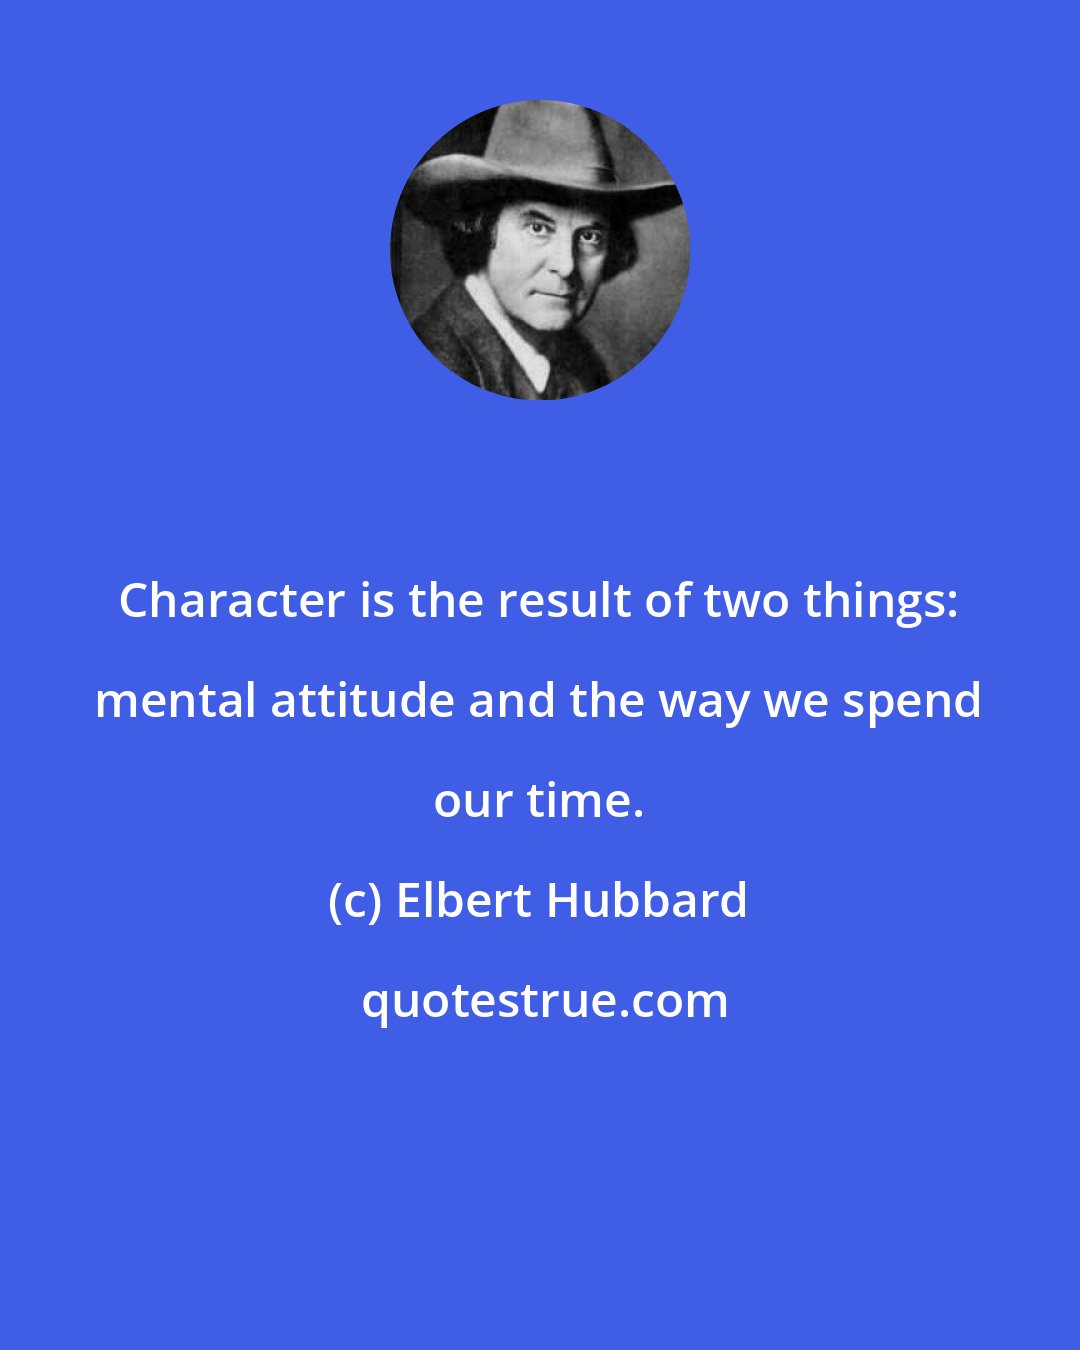 Elbert Hubbard: Character is the result of two things: mental attitude and the way we spend our time.